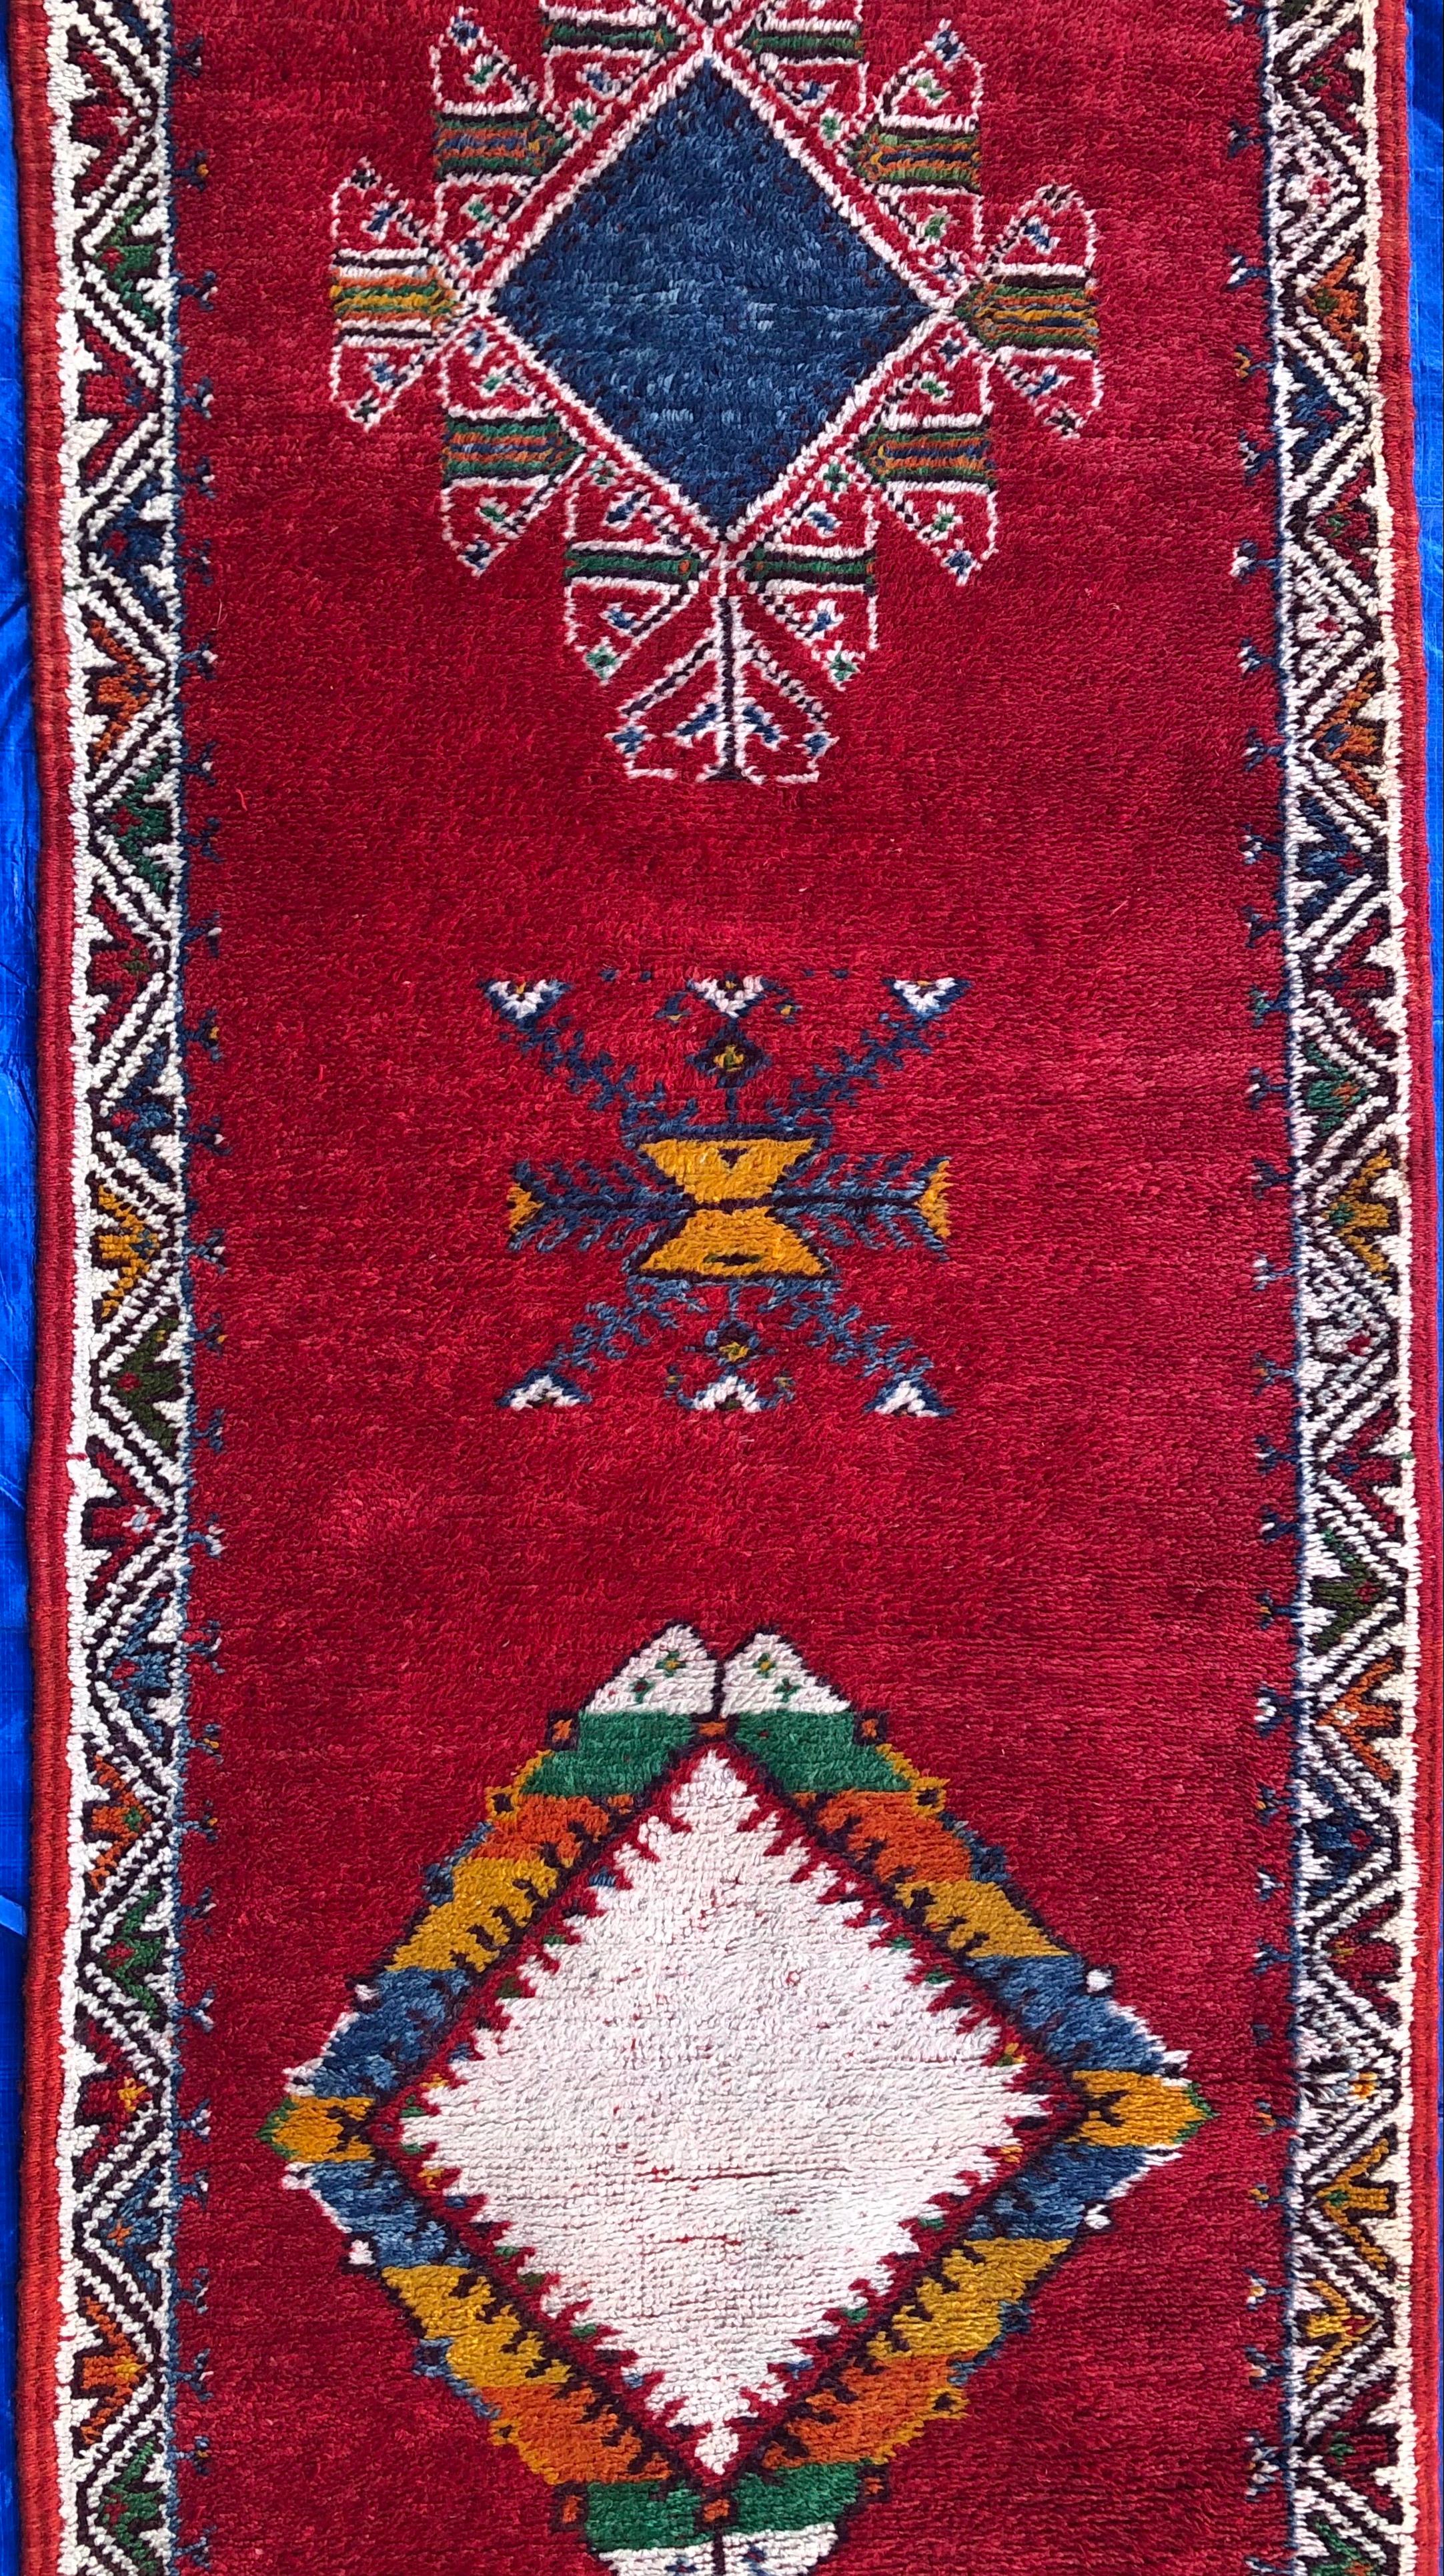 Very long Moroccan tribal carpet or runner with magnificent vivid colors and interesting motifs made by the Berber nomads. A wonderful example displaying a vibrant tribal sensibility, carpets like this also draw upon the classical weaving traditions